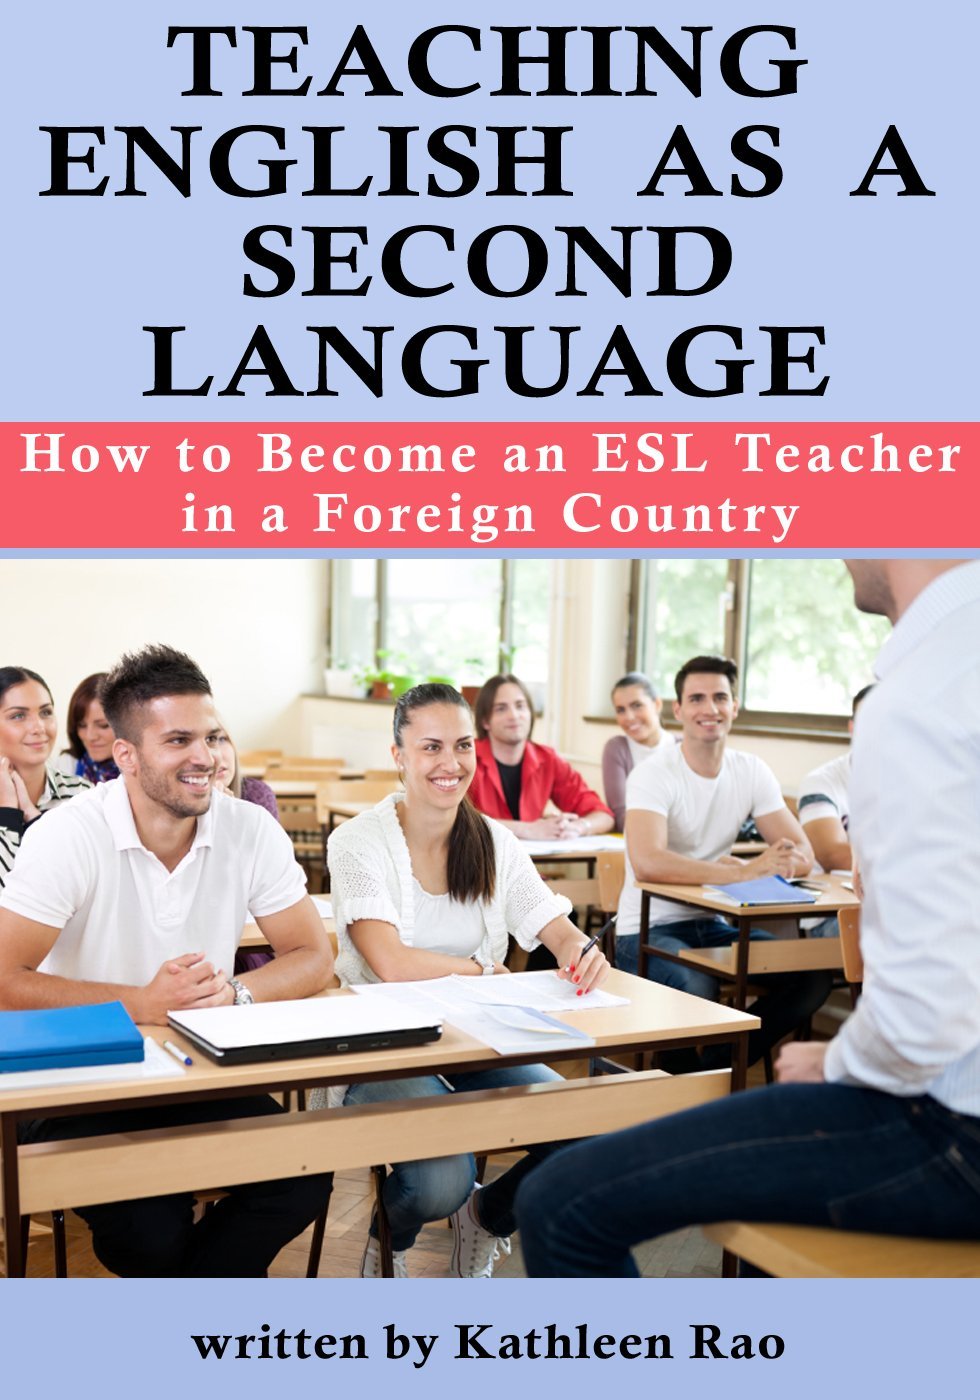 Teaching English as a Second Language: How to Become an ESL Teacher in a Foreign Country by Kathleen Rao